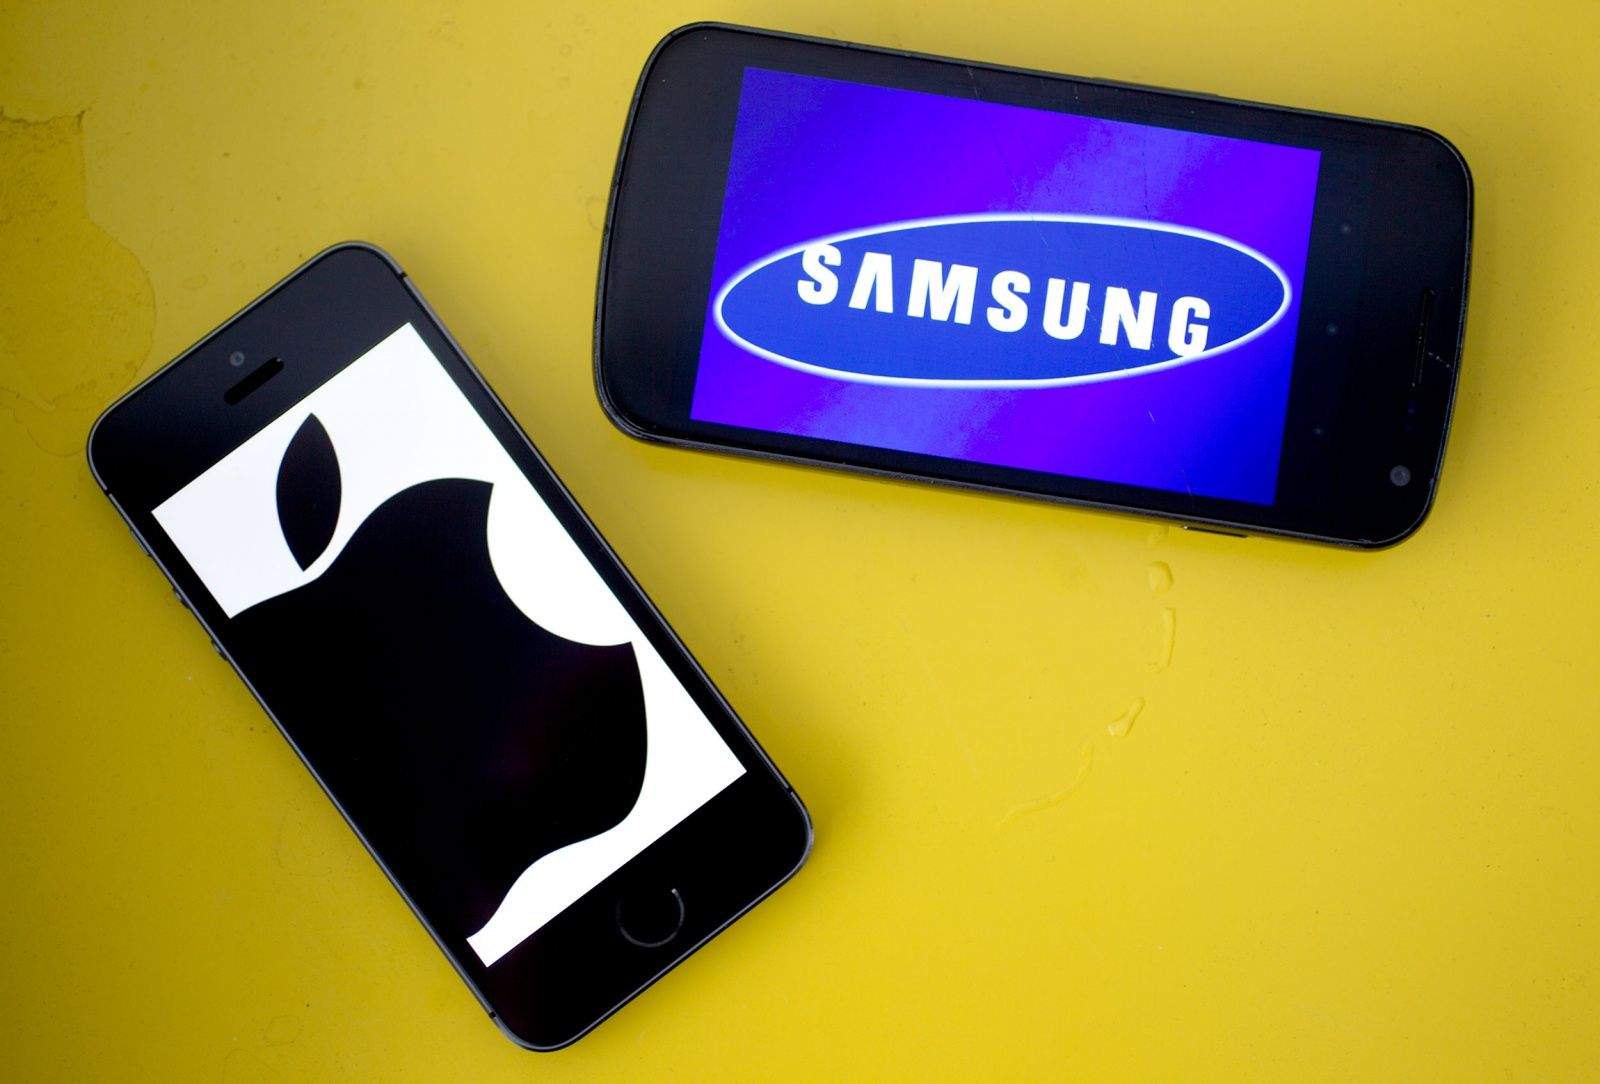 Samsung is after more of Apple's iPhone business.